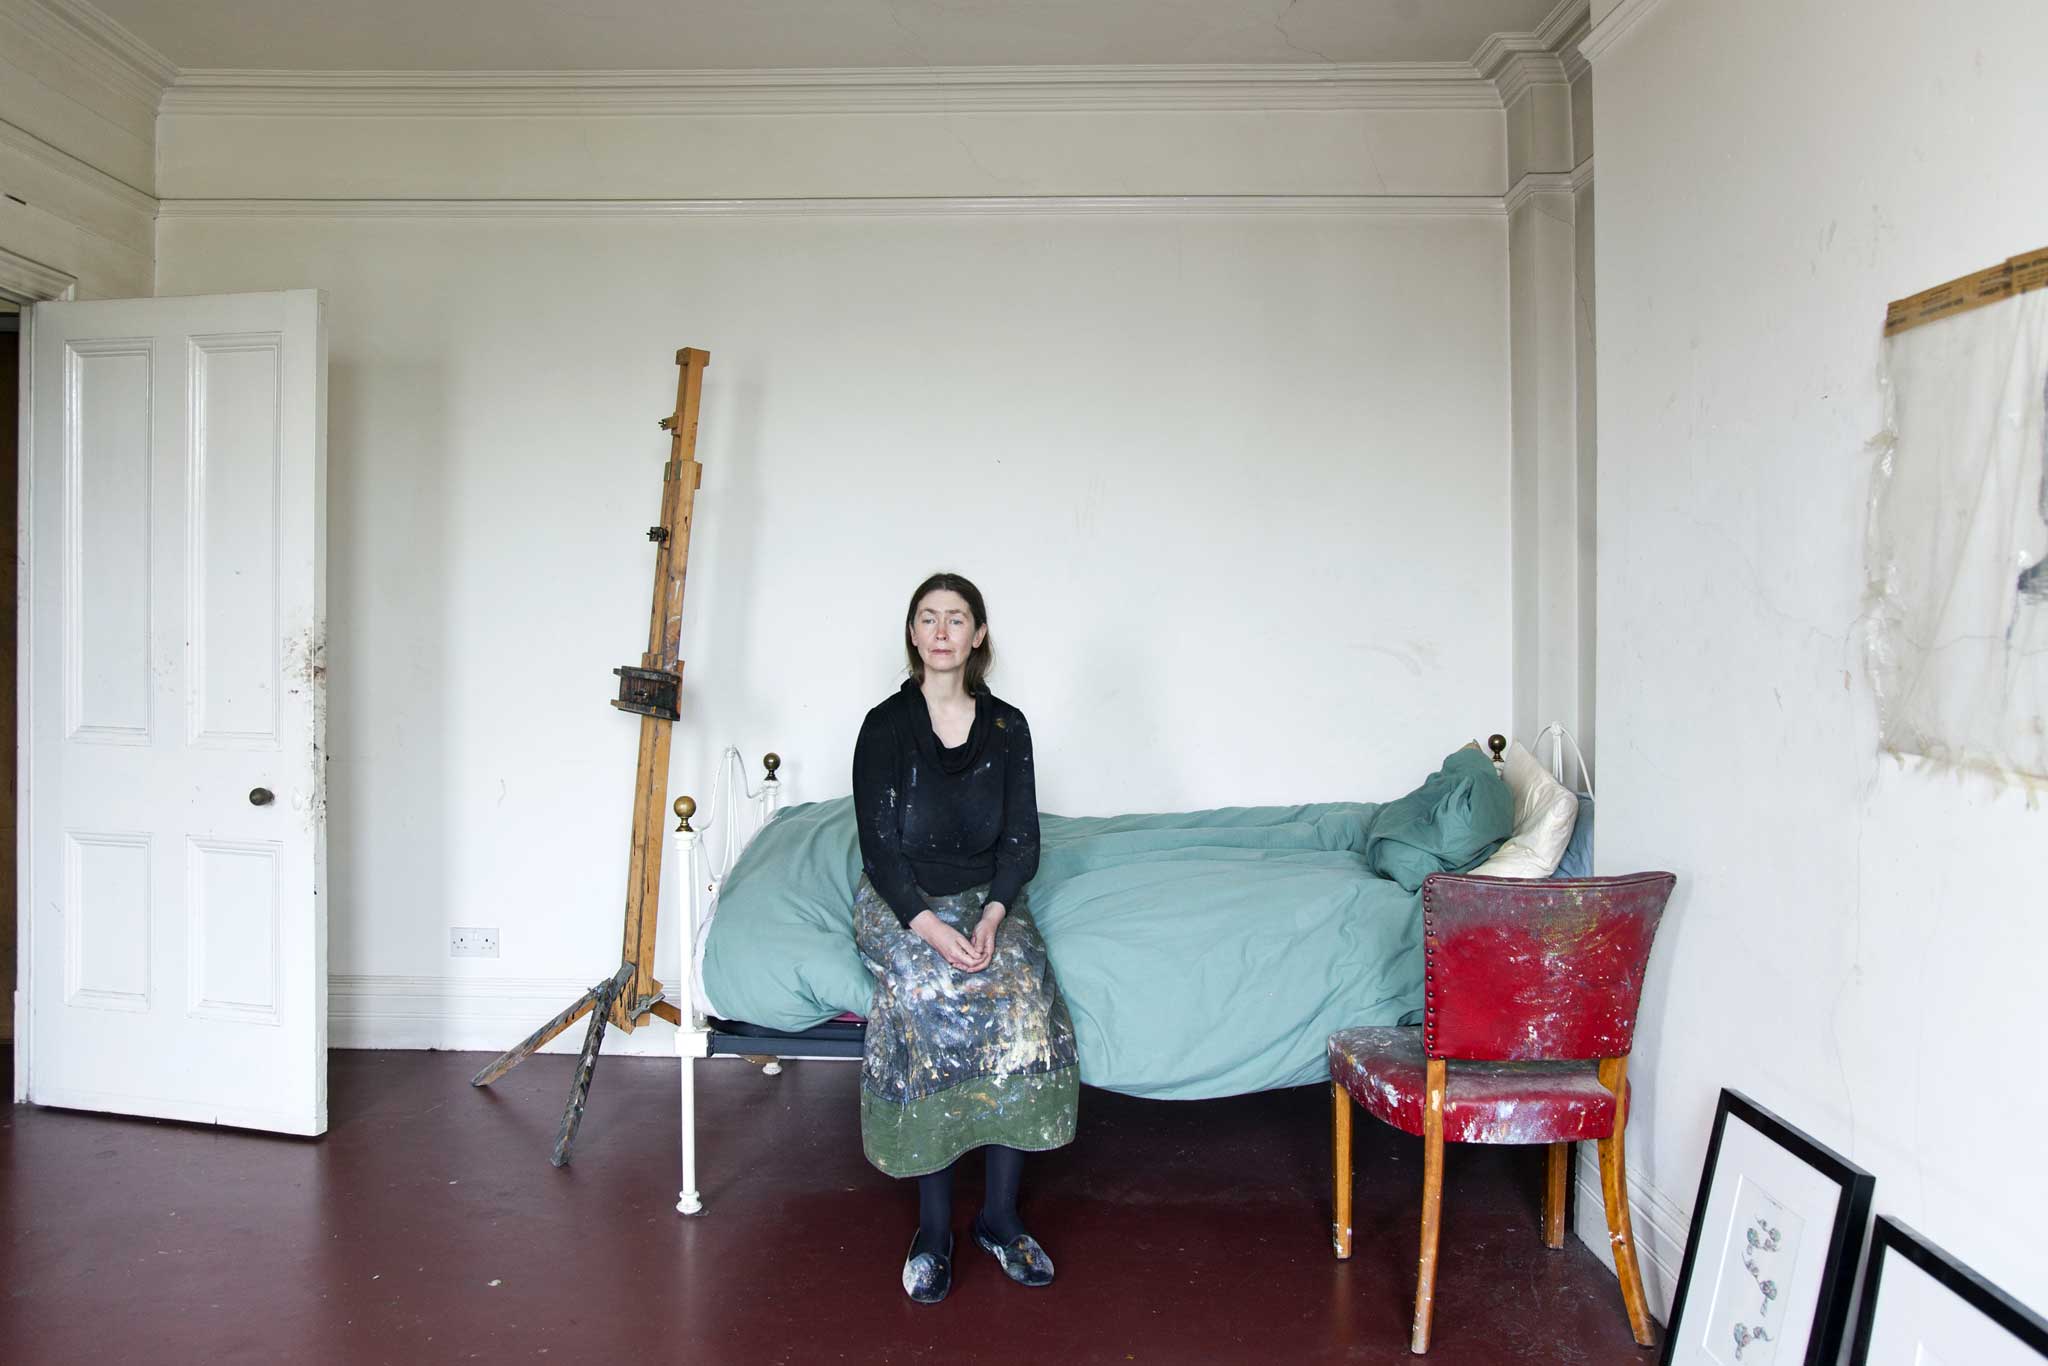 Paul's flat-come-studio is a spartan space bought for her by Freud when they were an item